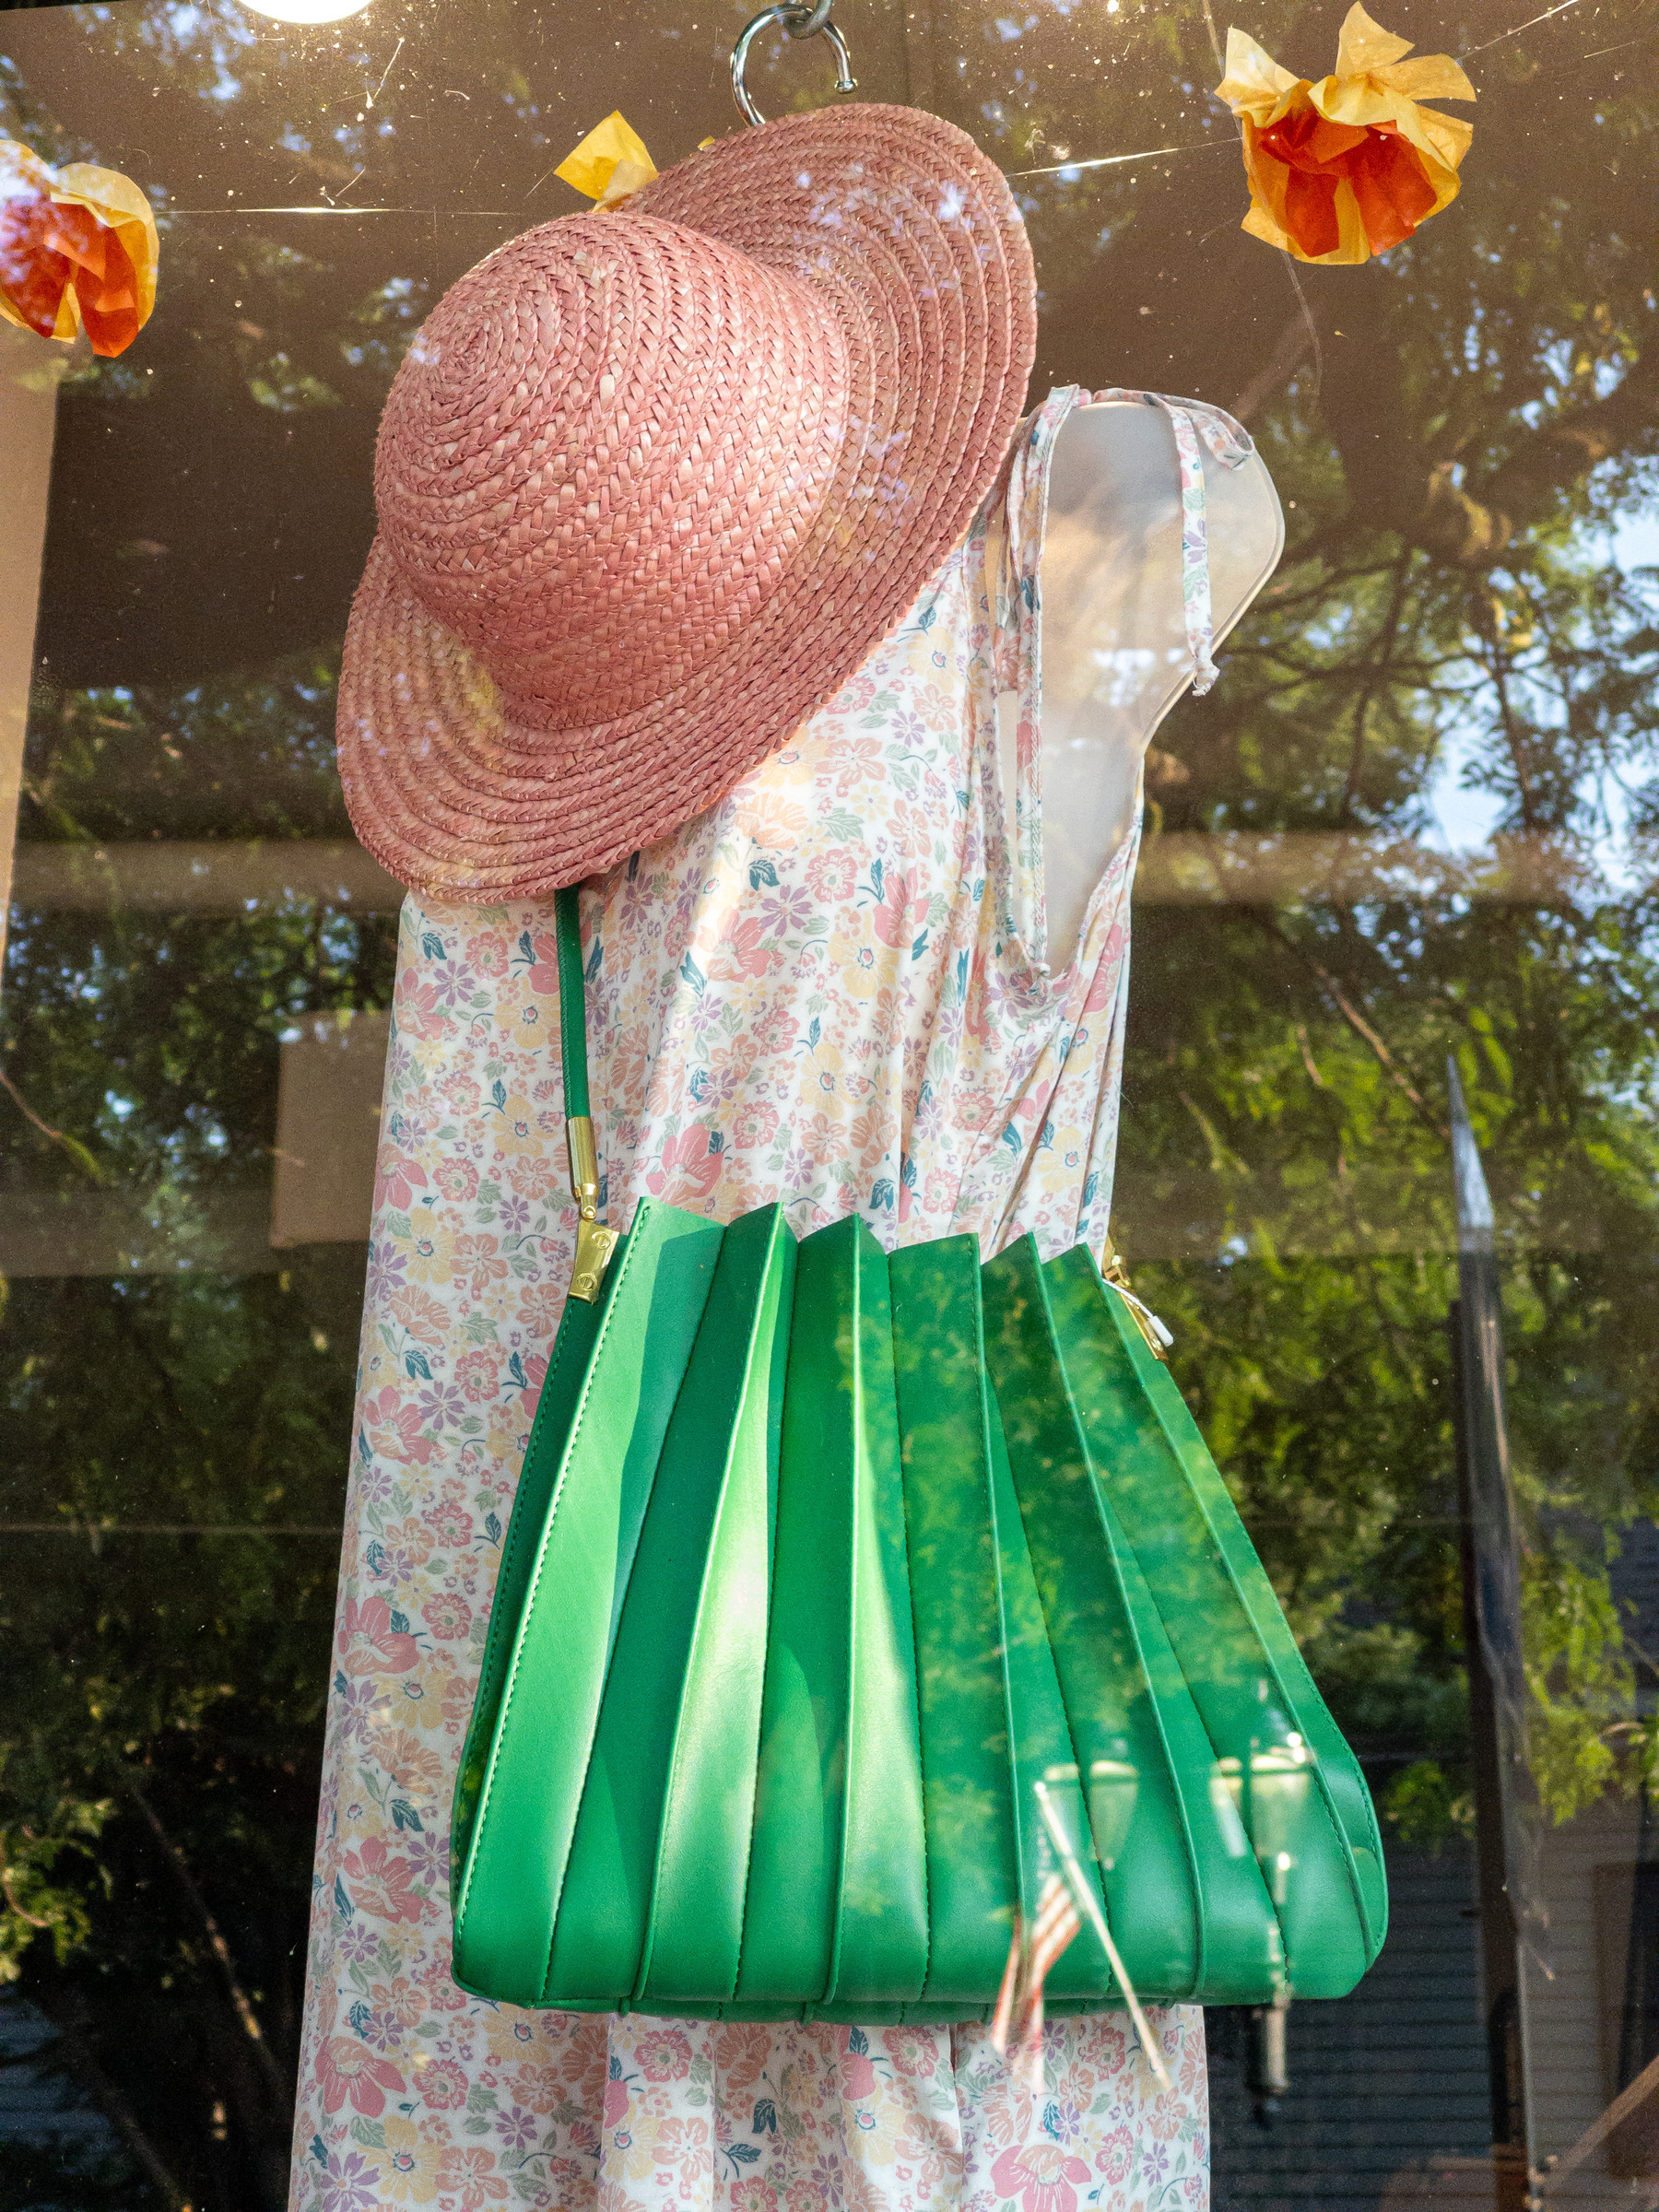 Pink hat and pleated green tote bag/purse draped on mannequin wearing a pink floral sundress in a shop window.